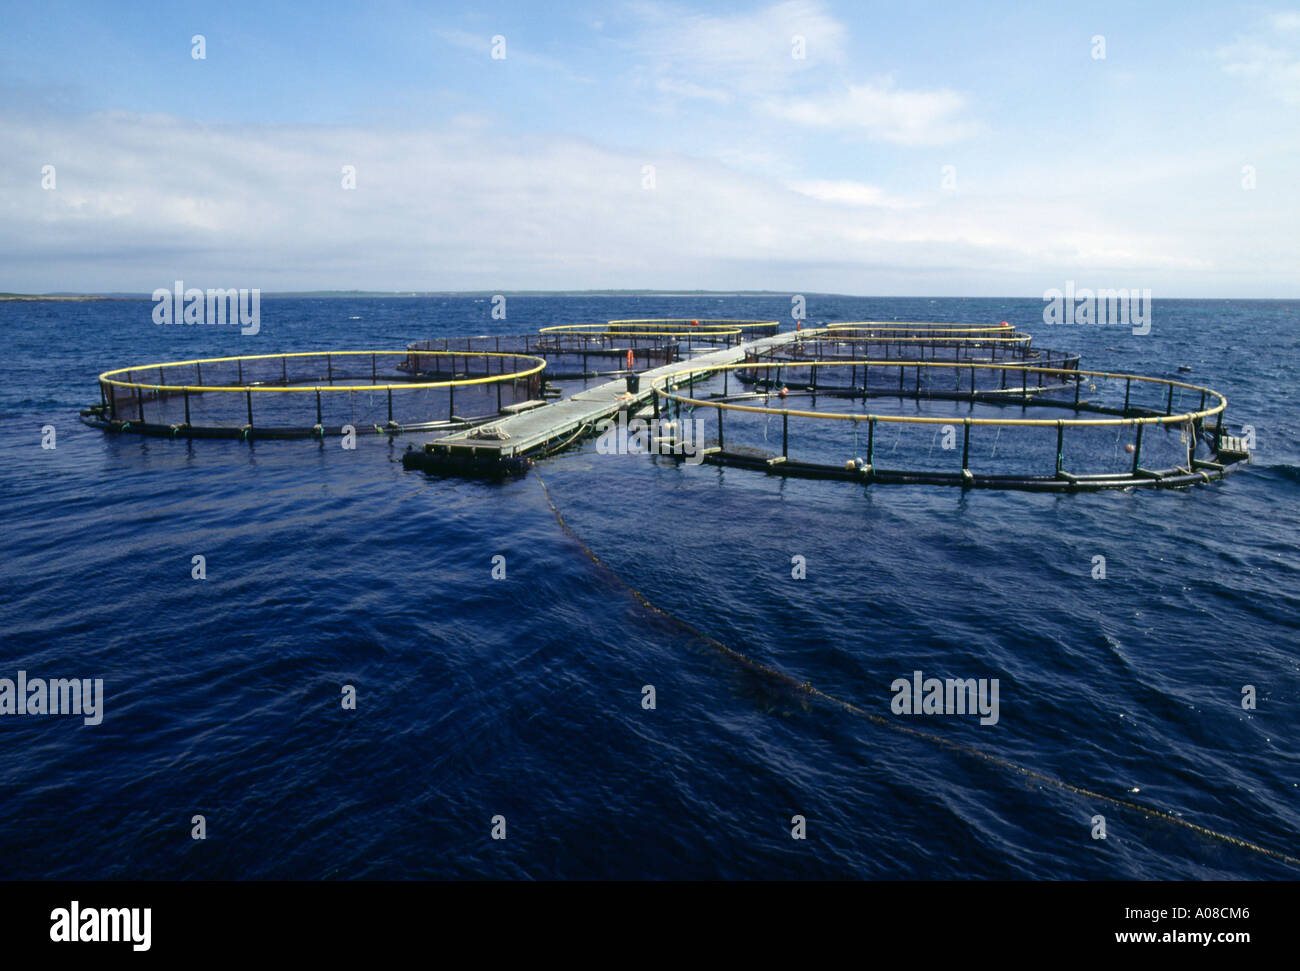 dh Westray Salmon ORKNEY SALMON UK Scottish Fish farm cages and walkway organic round cage farming aquaculture Scotland Stock Photo